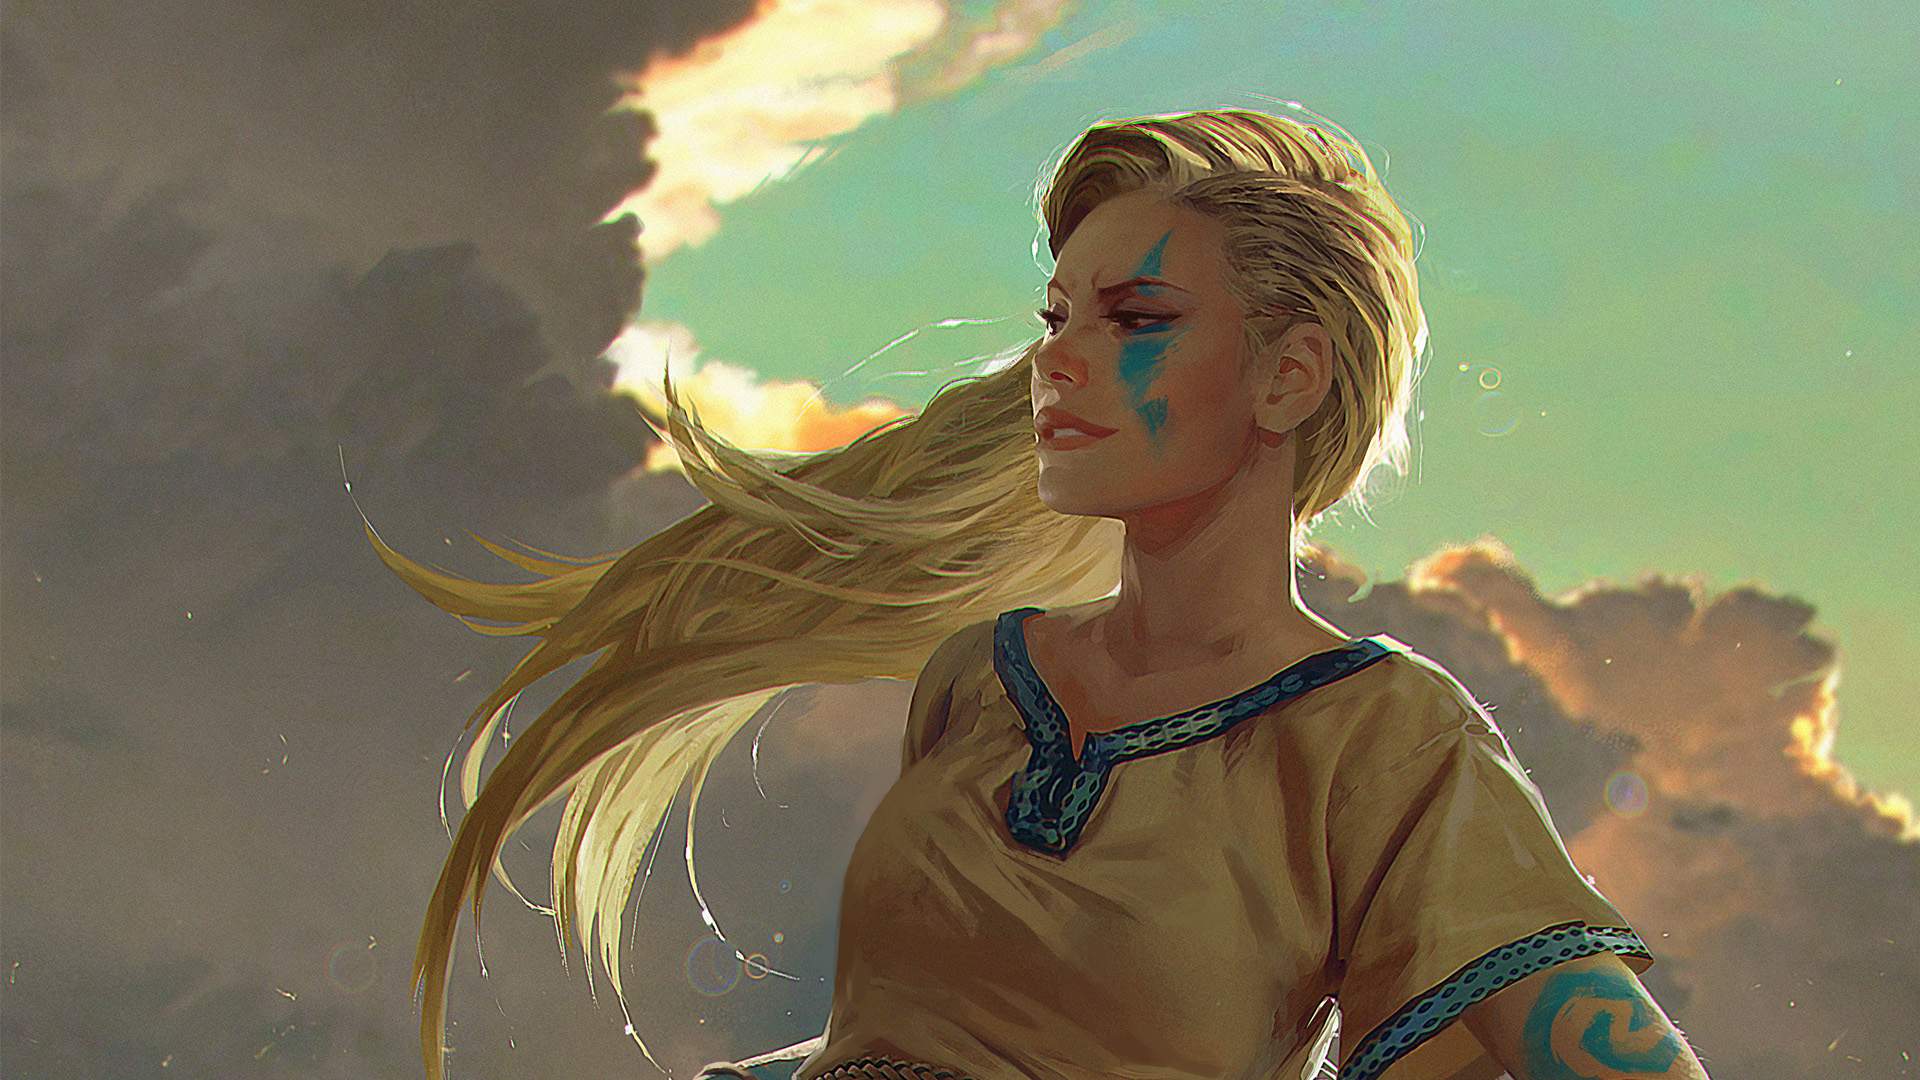 General 1920x1080 digital art artwork women blonde video games looking into the distance CD Projekt RED Gwent drawing